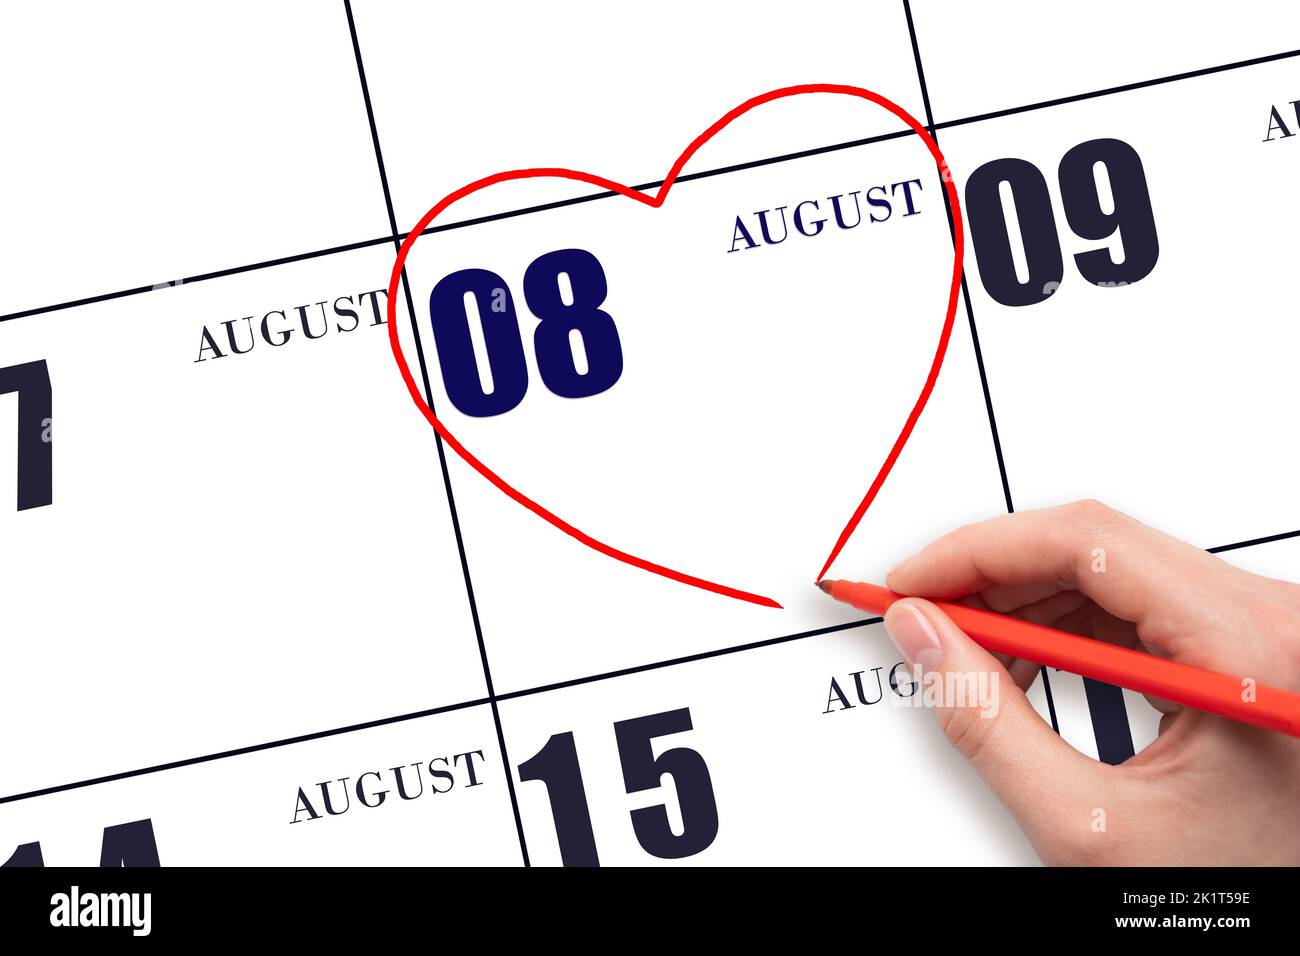 8th day of August. A woman's hand drawing a red heart shape on the calendar date of 8 August. Heart as a symbol of love. Summer month. Day of the year Stock Photo